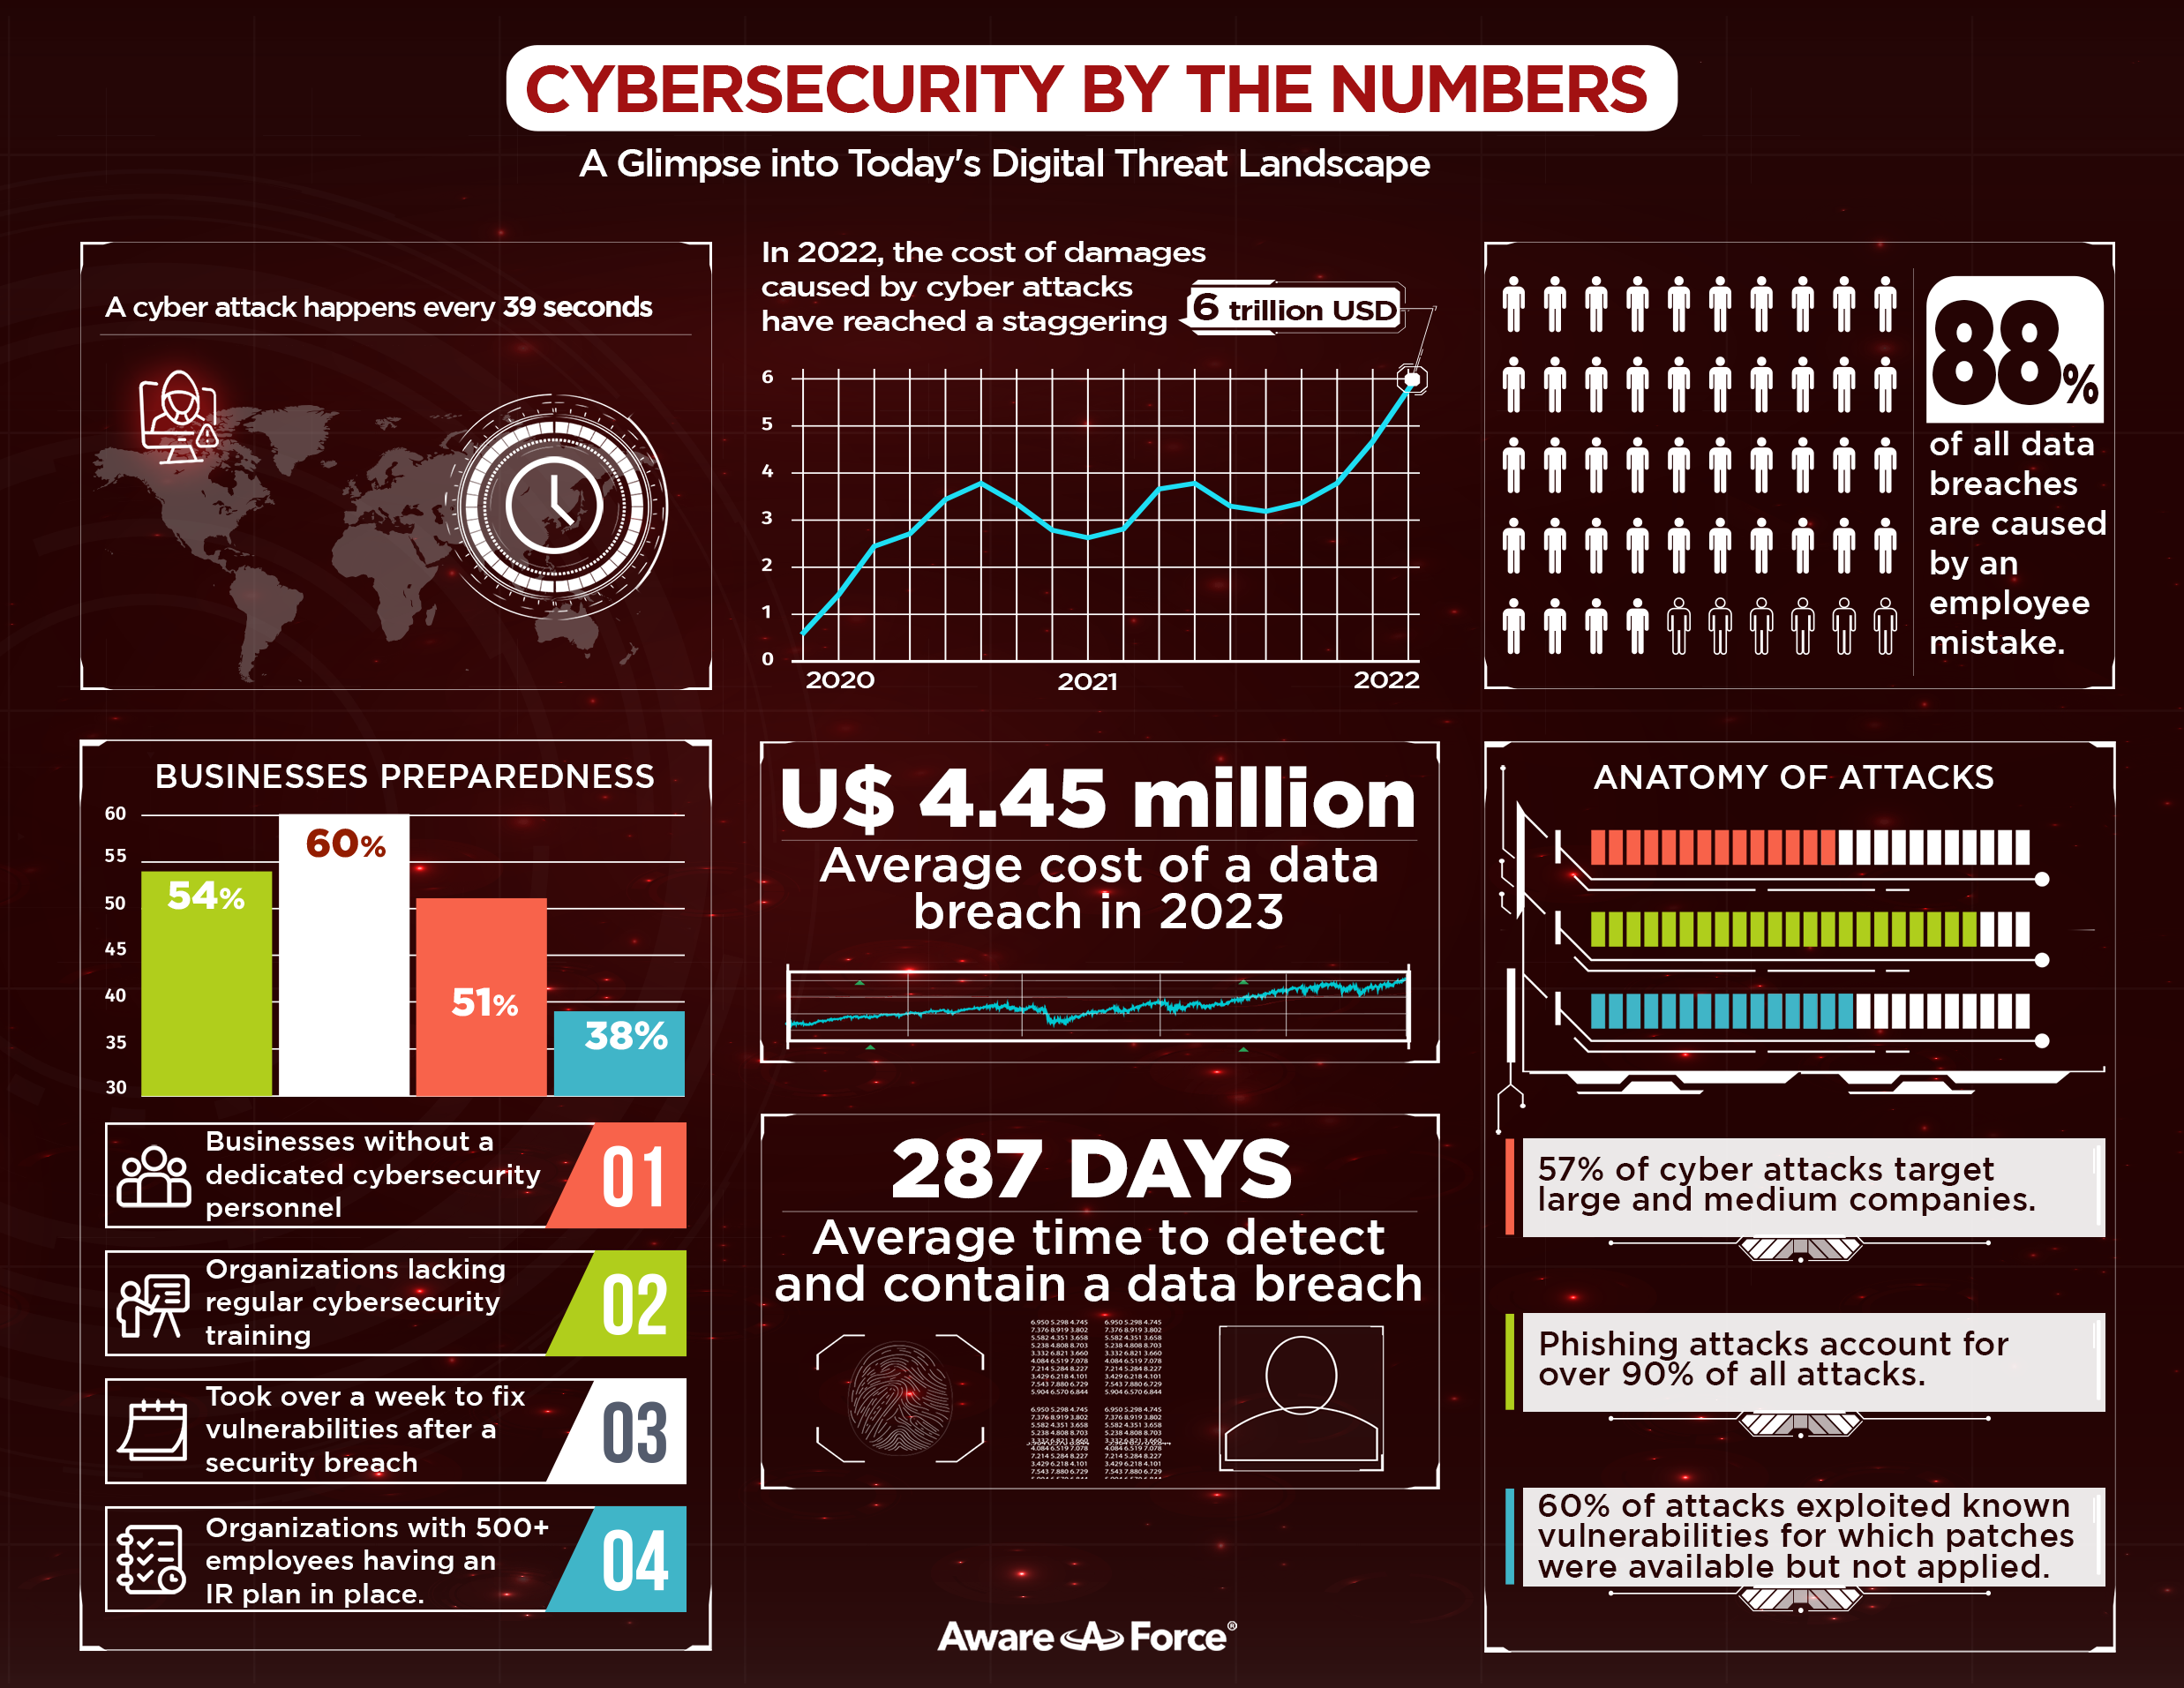 Cybersecurity Awareness Month: A glimpse into today's digital threat landscape.